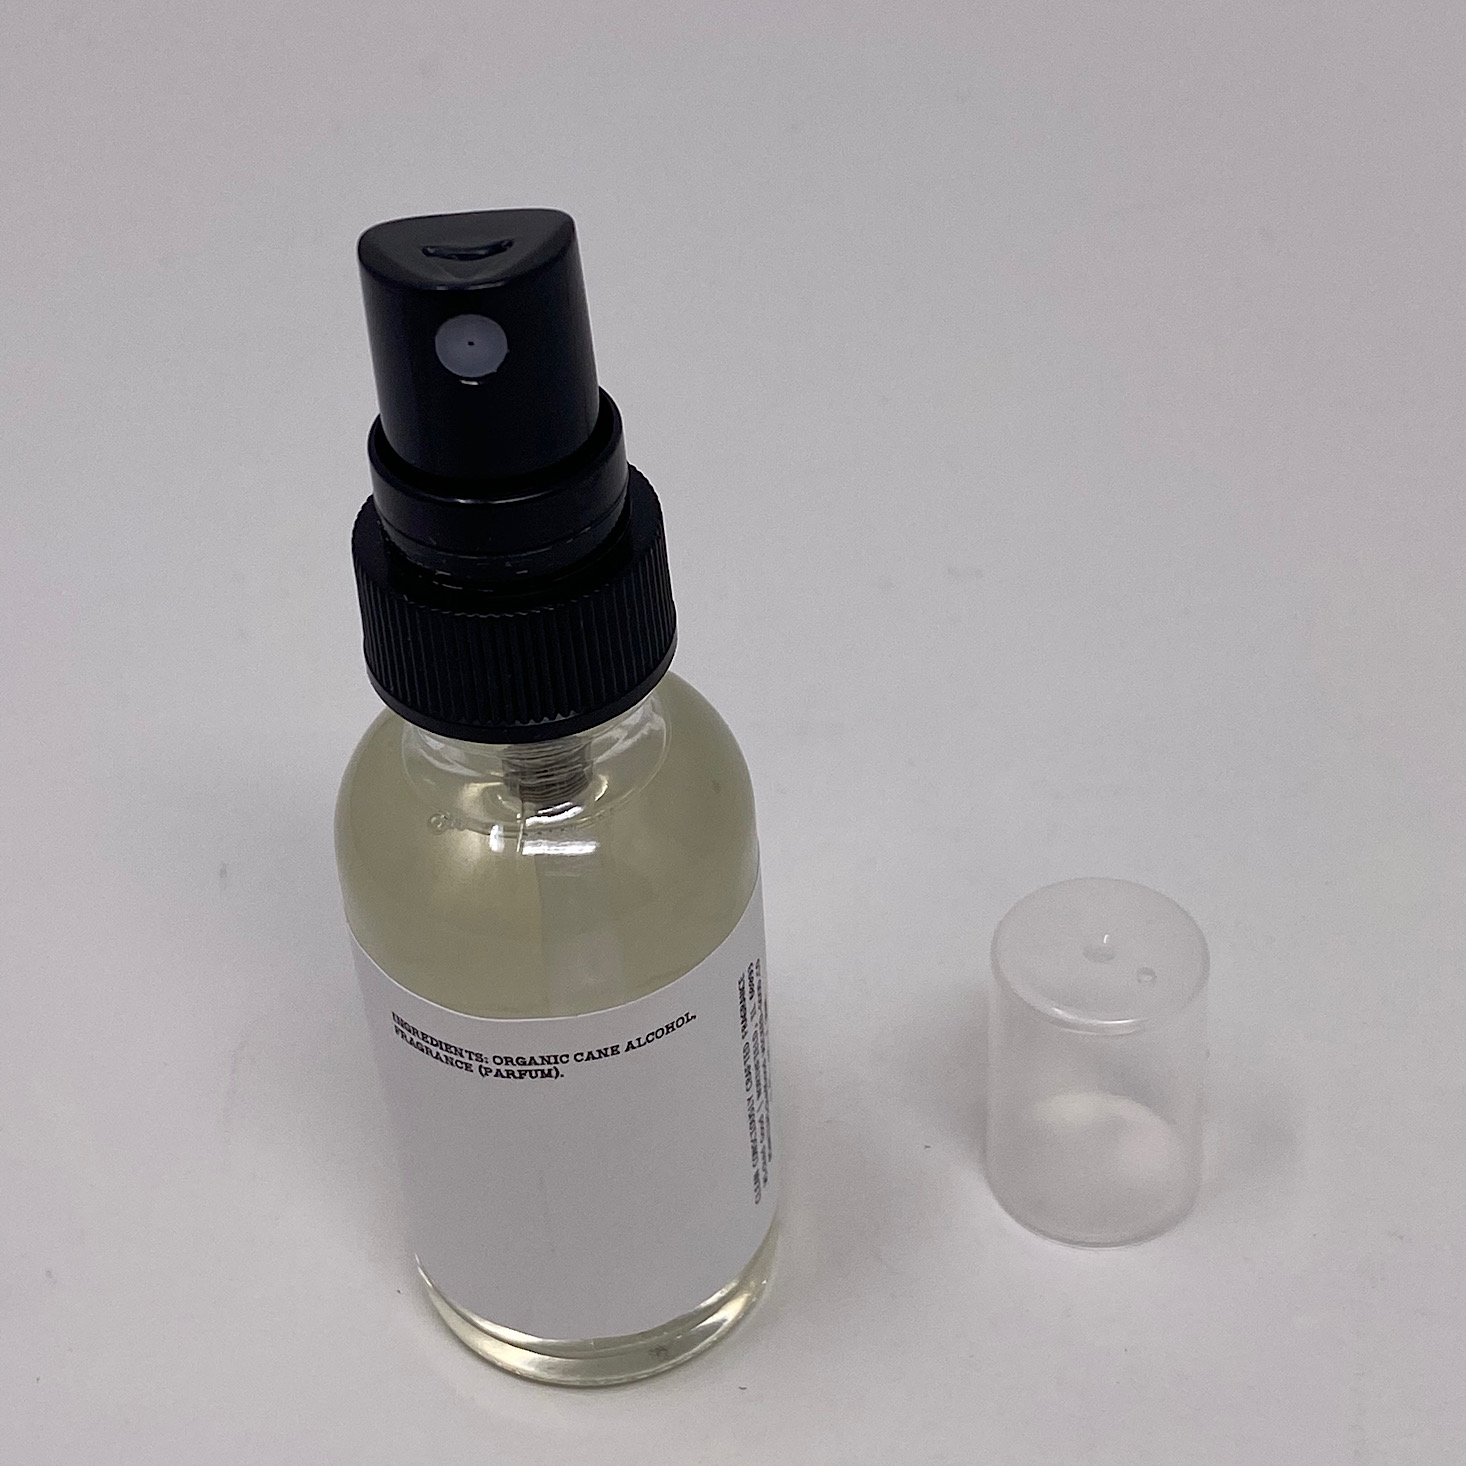 Wicked Good Perfume Review + Coupon - September 2020 | MSA